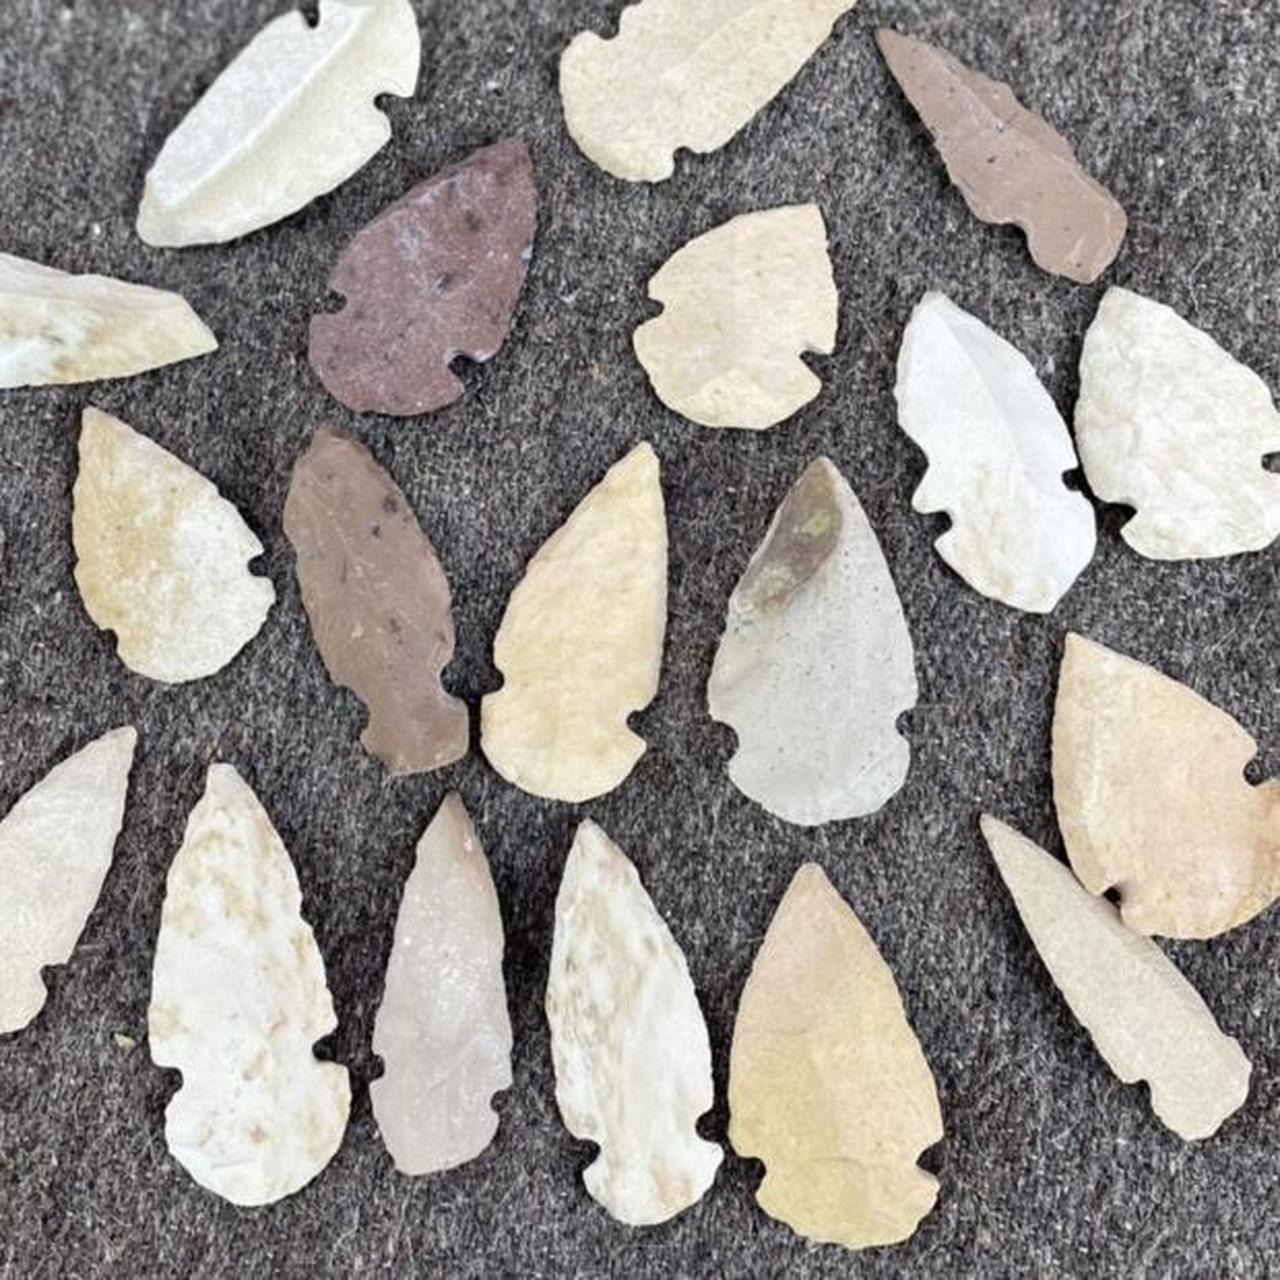 Product Image 4 - lot of 20 arrowheads 

found